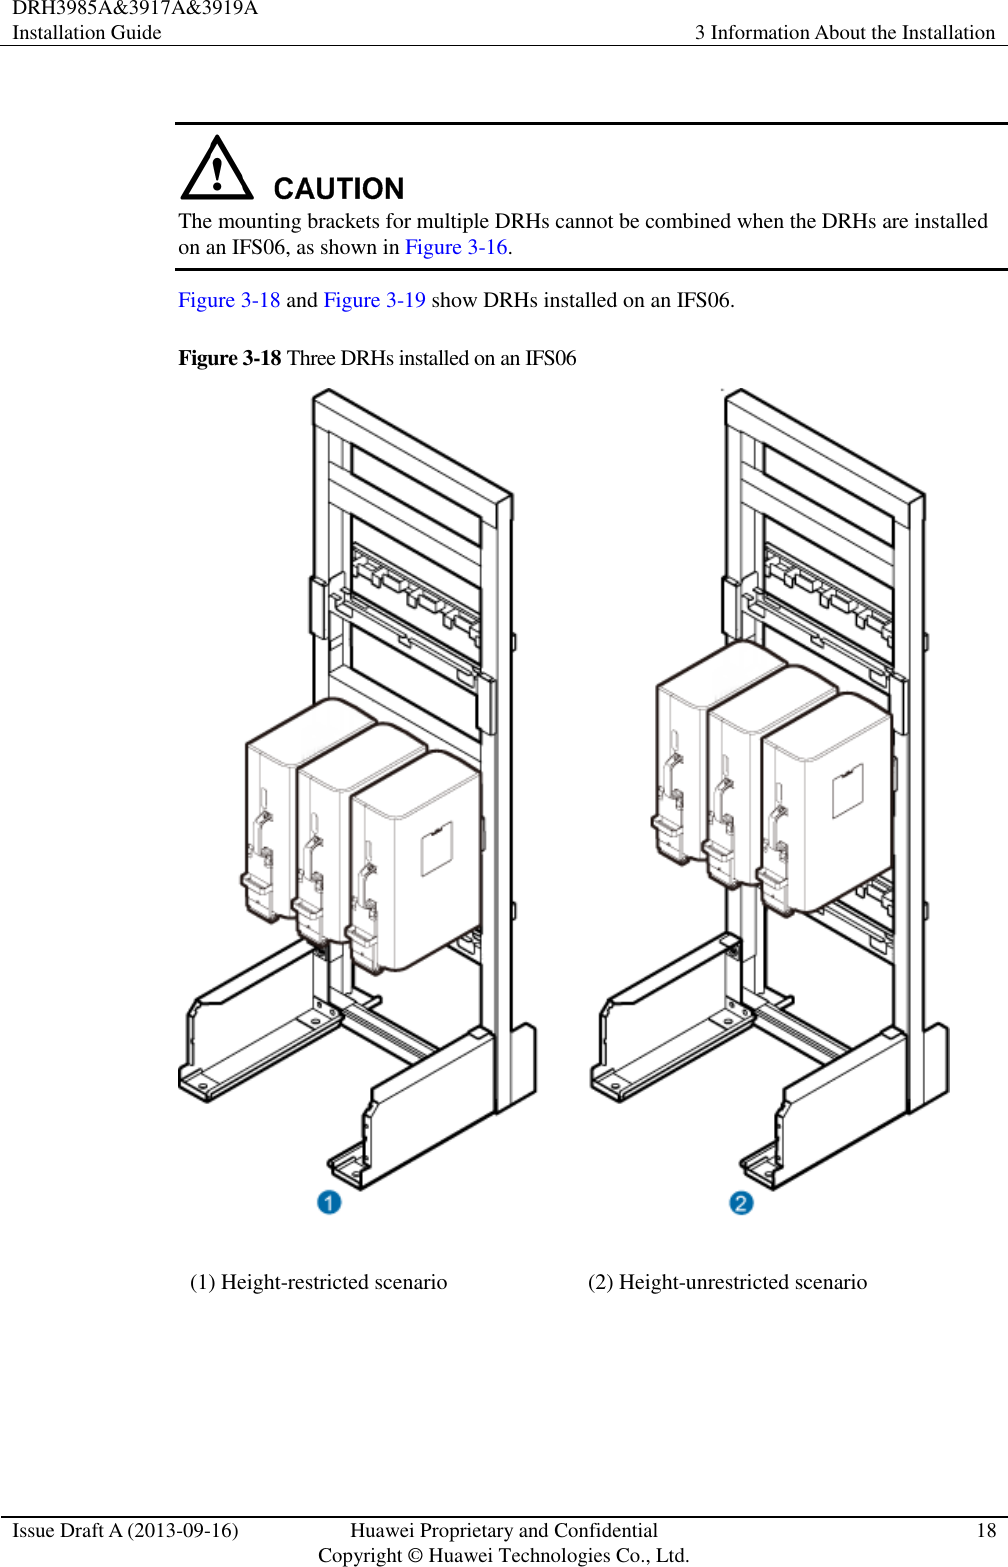 DRH3985A&amp;3917A&amp;3919A Installation Guide 3 Information About the Installation  Issue Draft A (2013-09-16) Huawei Proprietary and Confidential                                     Copyright © Huawei Technologies Co., Ltd. 18    The mounting brackets for multiple DRHs cannot be combined when the DRHs are installed on an IFS06, as shown in Figure 3-16. Figure 3-18 and Figure 3-19 show DRHs installed on an IFS06. Figure 3-18 Three DRHs installed on an IFS06  (1) Height-restricted scenario (2) Height-unrestricted scenario  